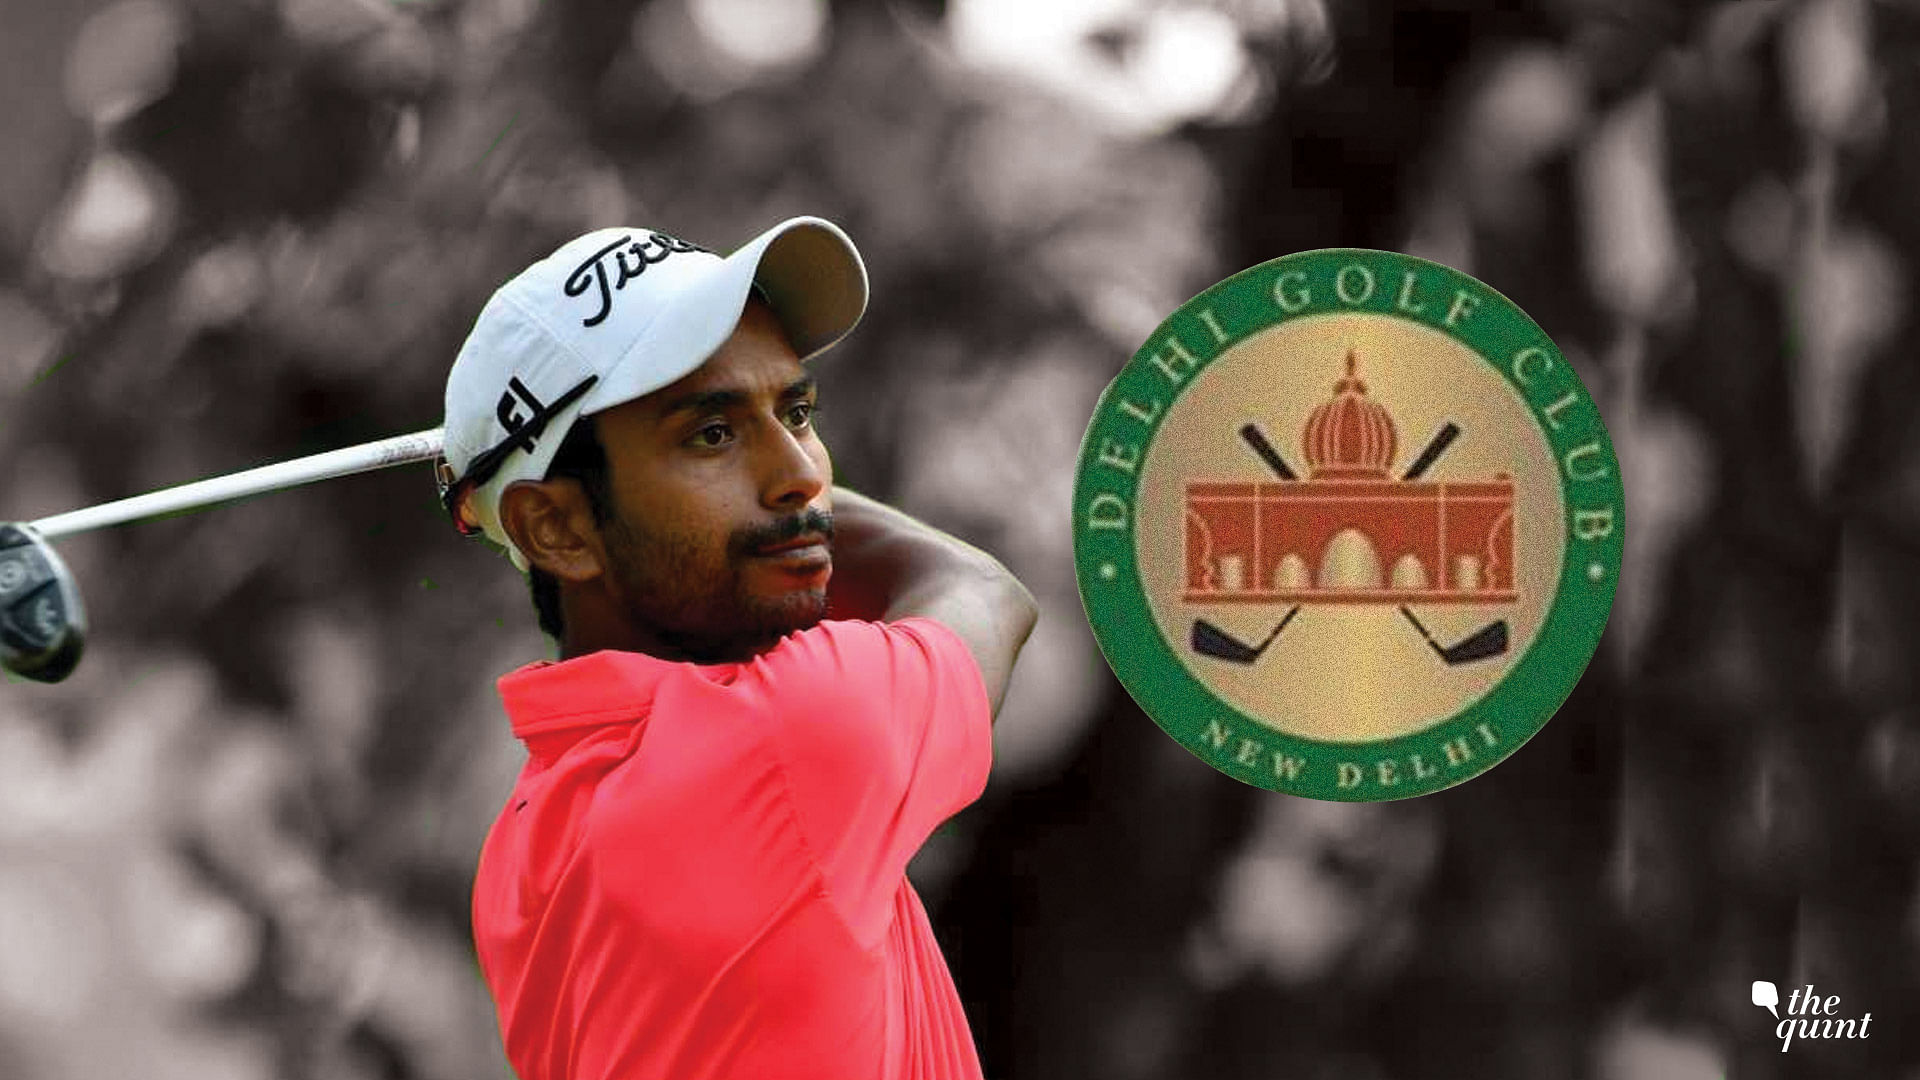 Indian golfer Rashid Khan, winner of two Asian Tour titles, has now been embroiled in a feud with the Delhi Golf Club (DGC) for a considerable period of time.